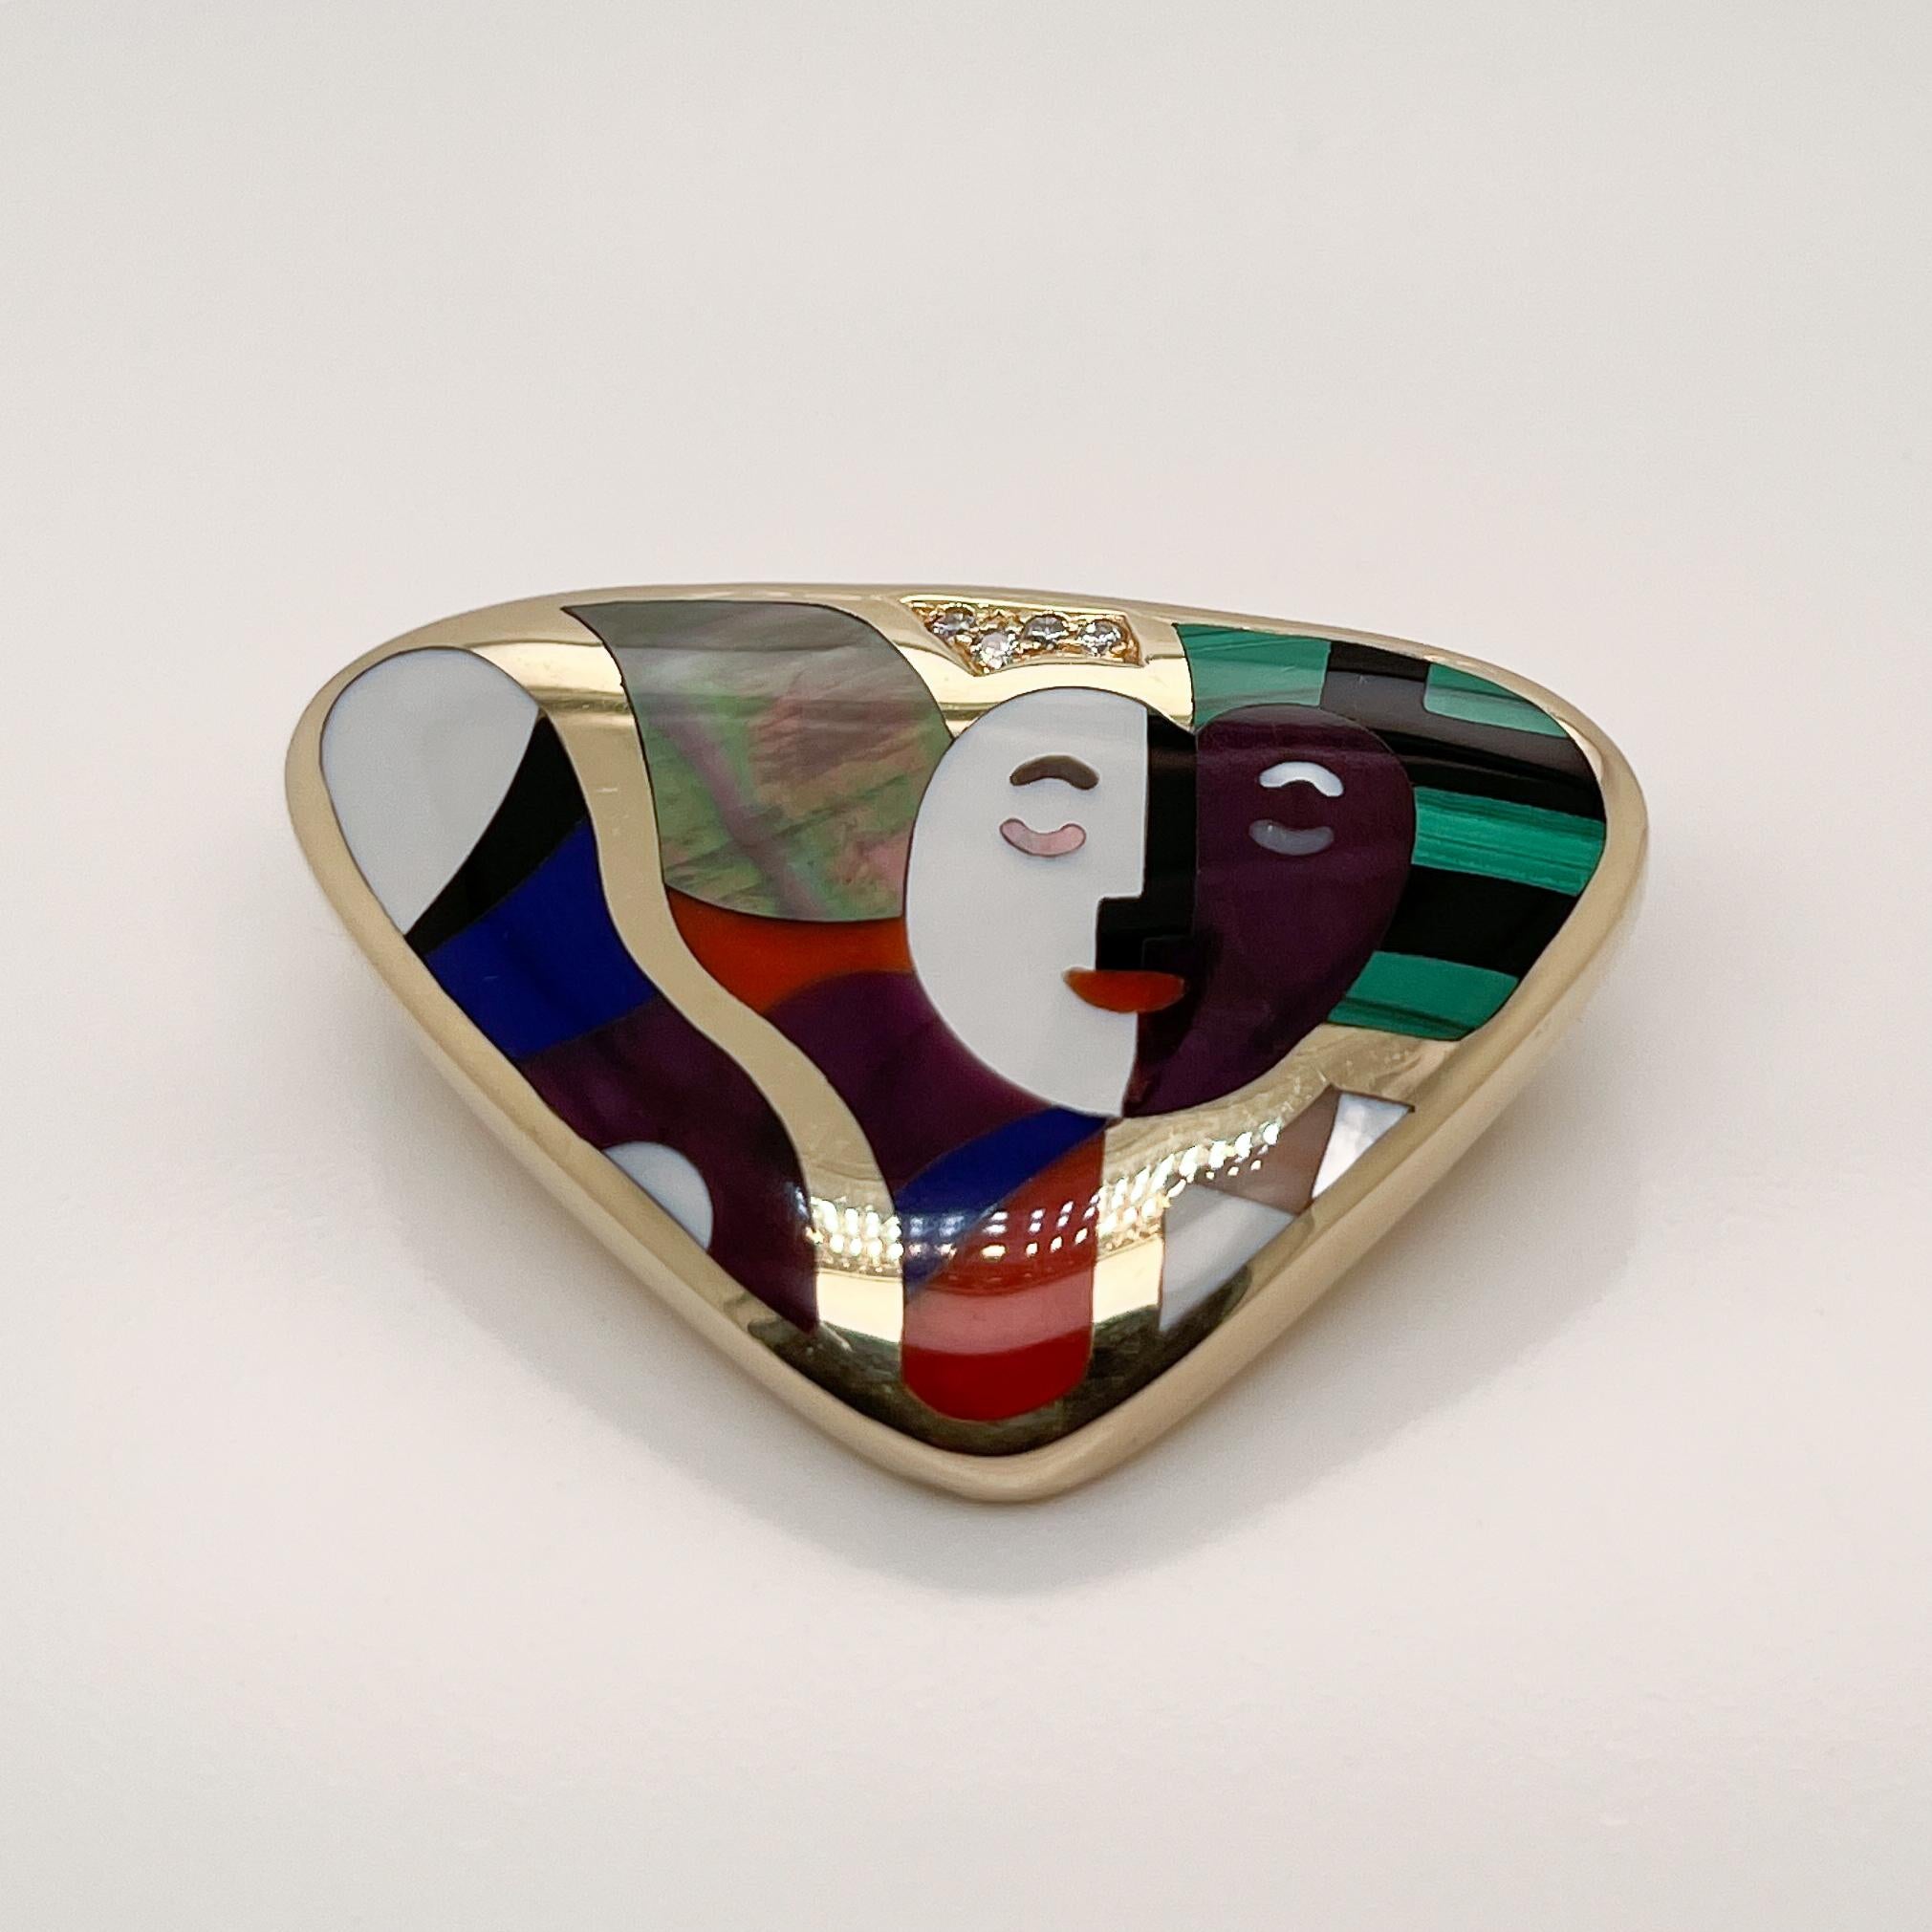 A very fine Asch Grossbardt brooch.

With a stylized portrait of a woman's face with mother of pearl & onyx surrounded by inlaid amethyst, carnelian, lapis, and malachite in 14k gold. 

Pave set with small round brilliant diamonds pave near the